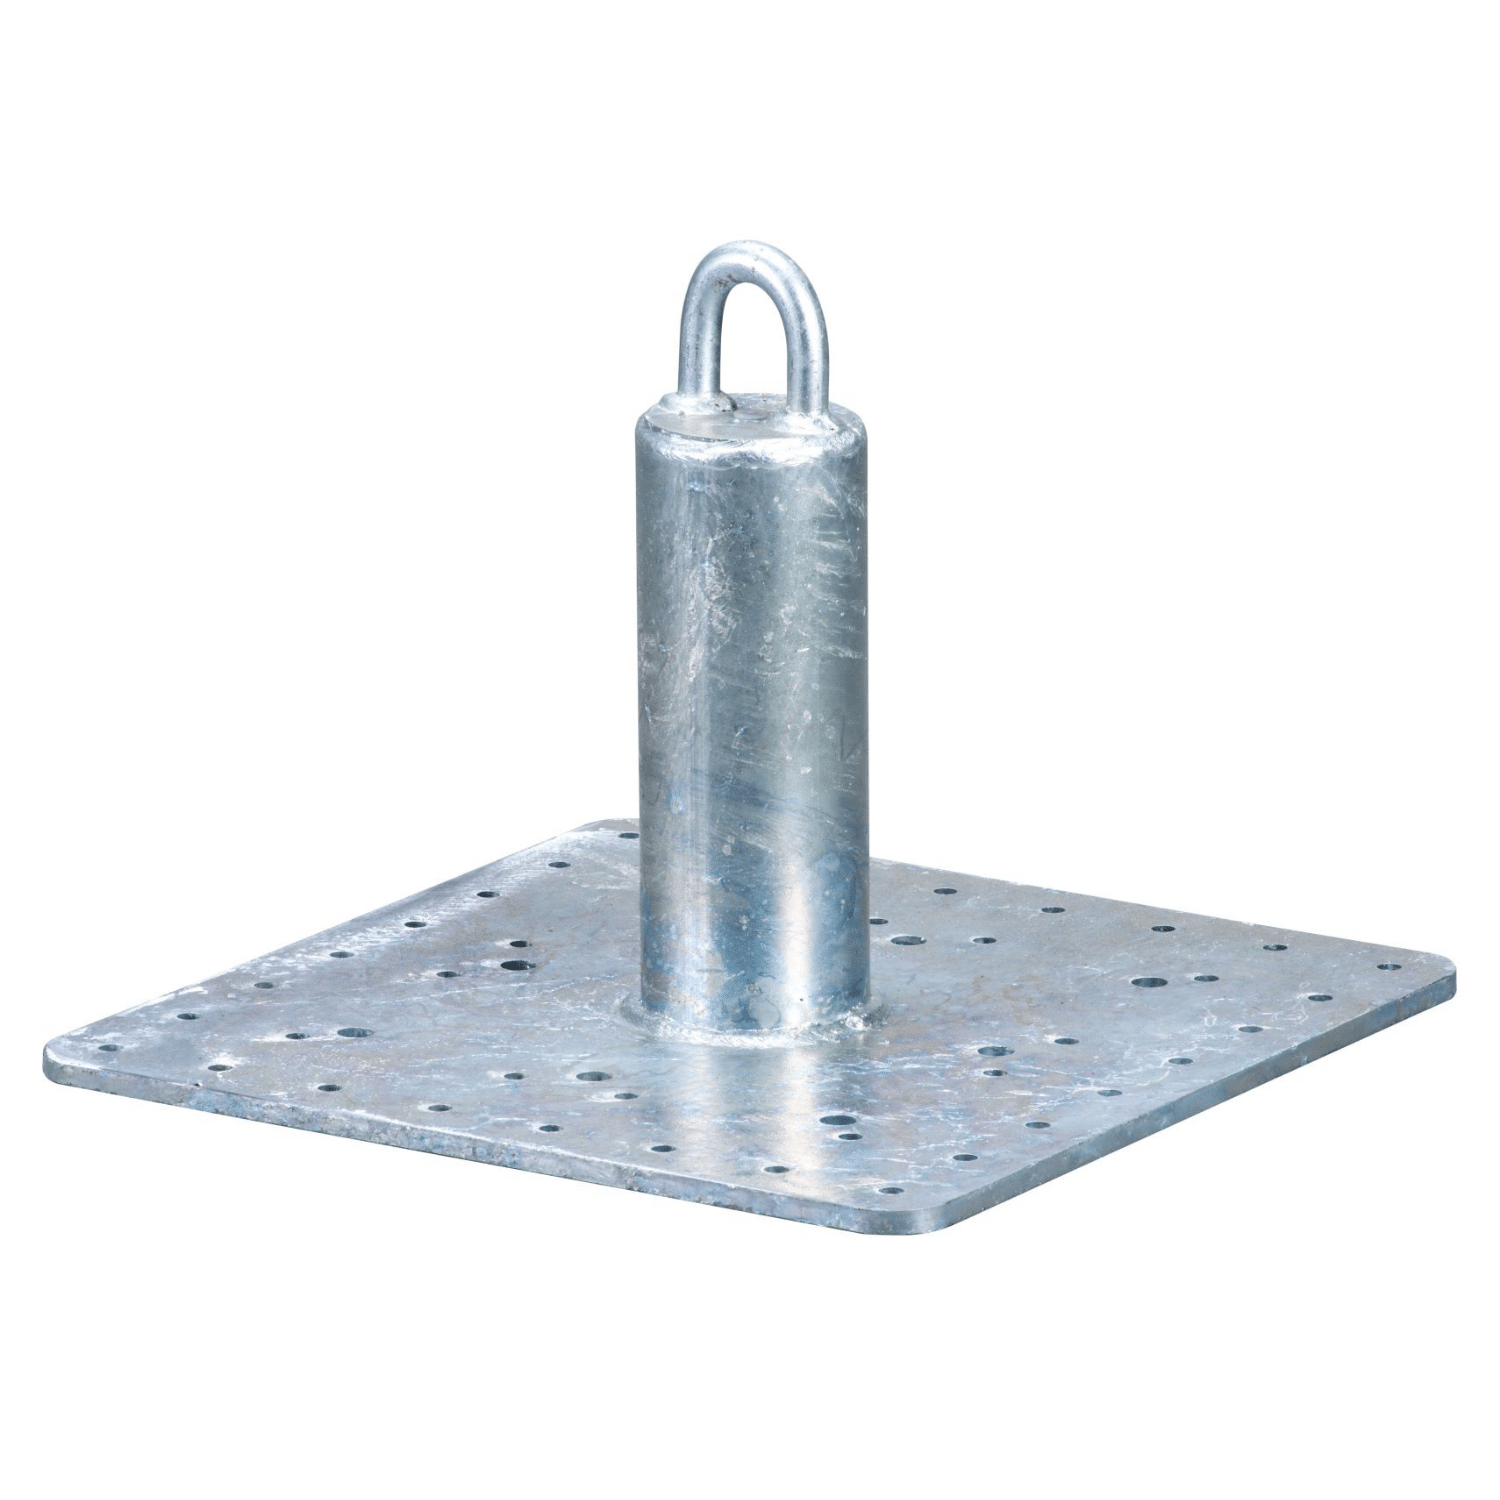 Tie-Down Commercial Roof Anchor from Columbia Safety